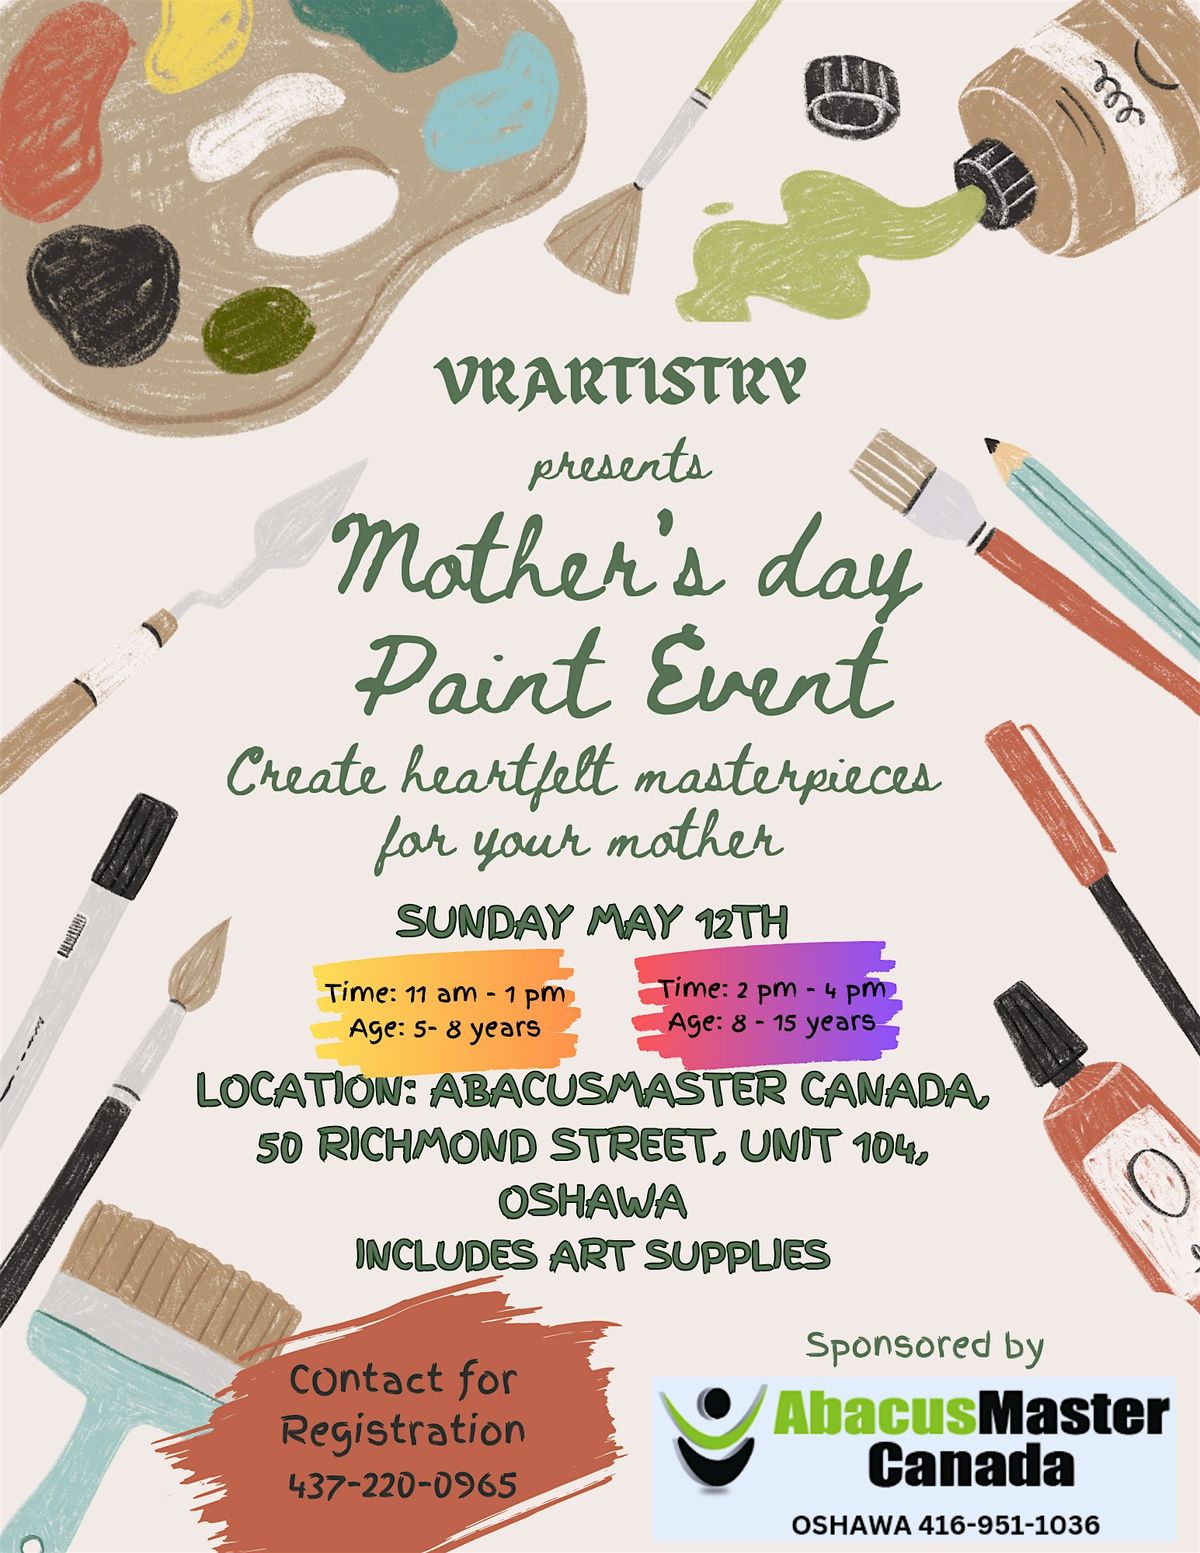 Mother's day Paint Event by Vibha (VRARTISTRY)